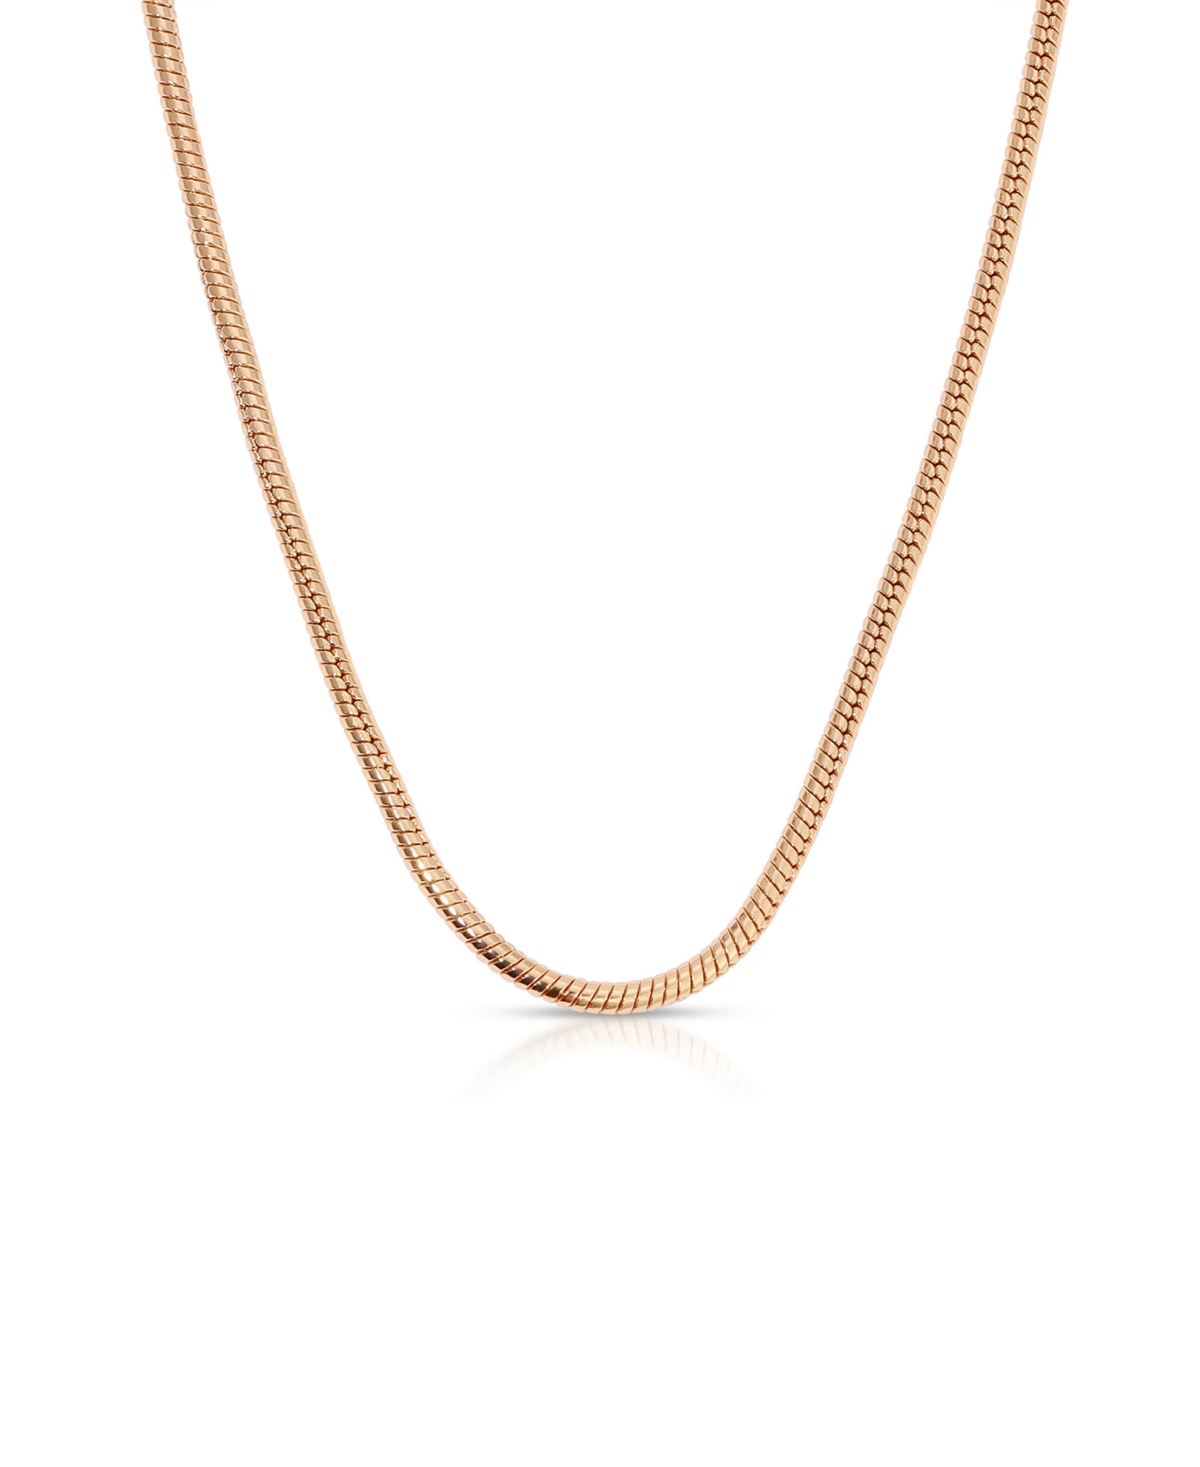 Classic 18k Gold Plated Snake Chain Necklace - Gold